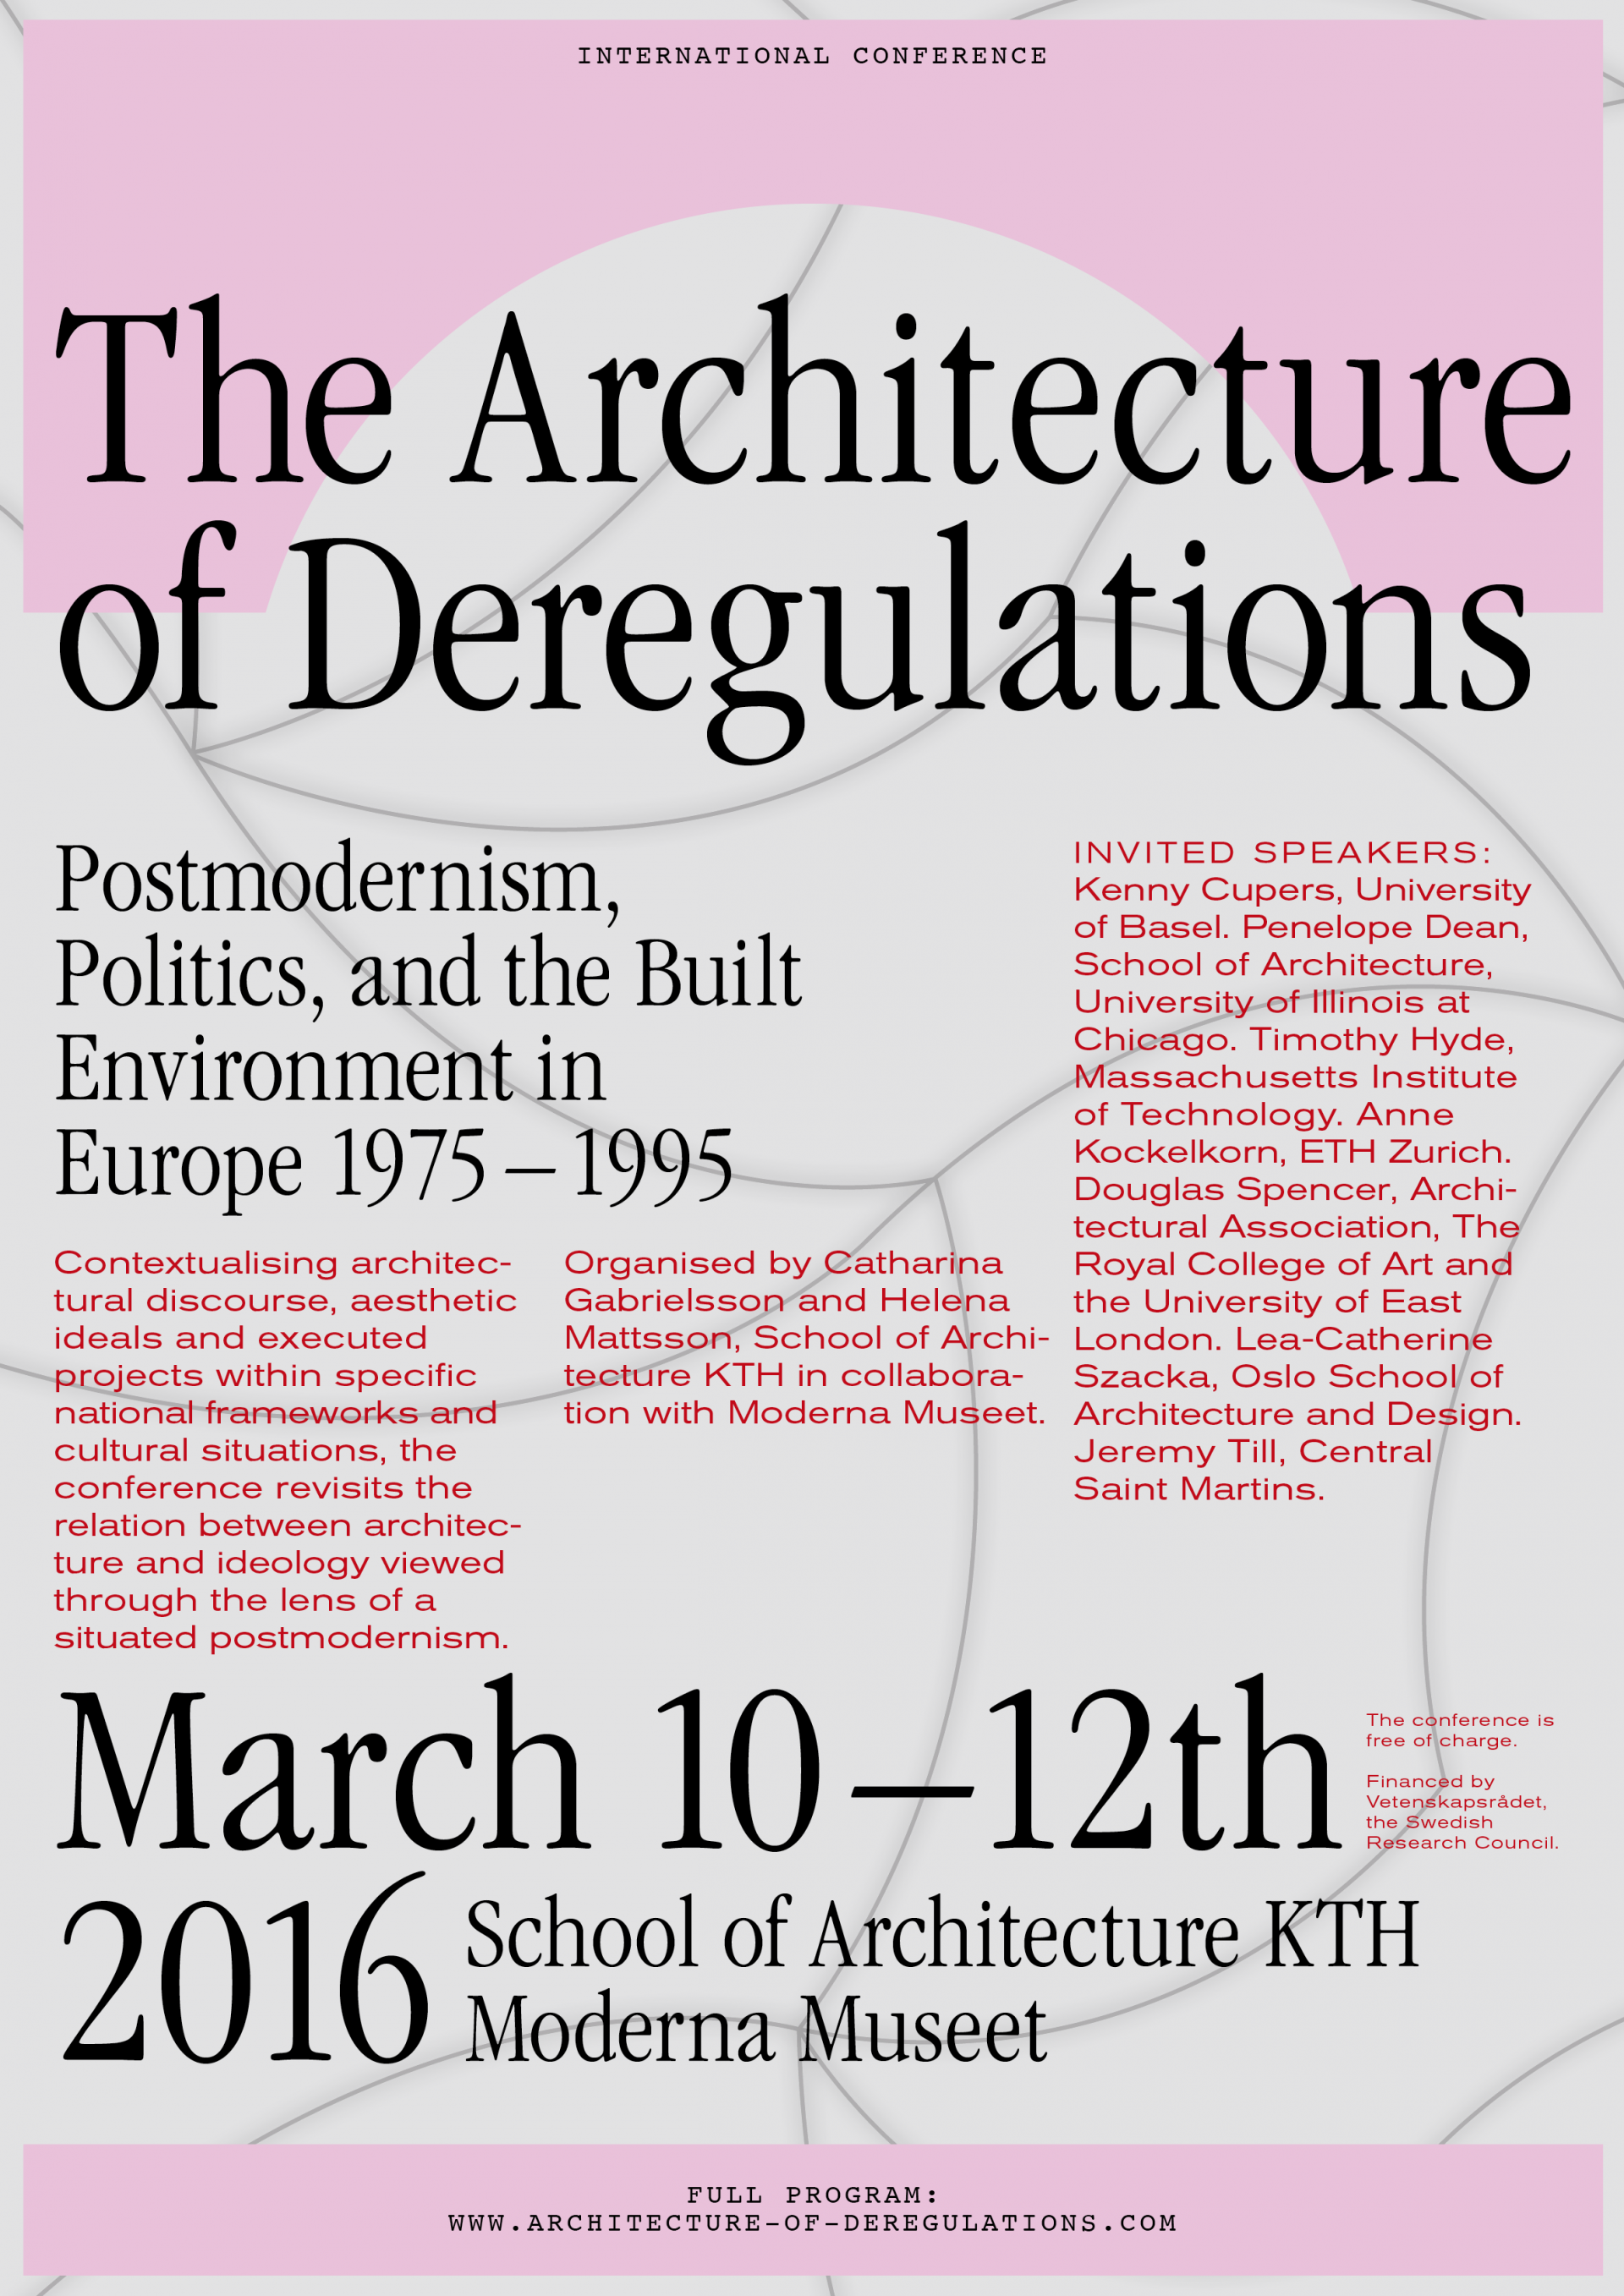 Sara Kaaman Architecture of Deregulations – conference identity